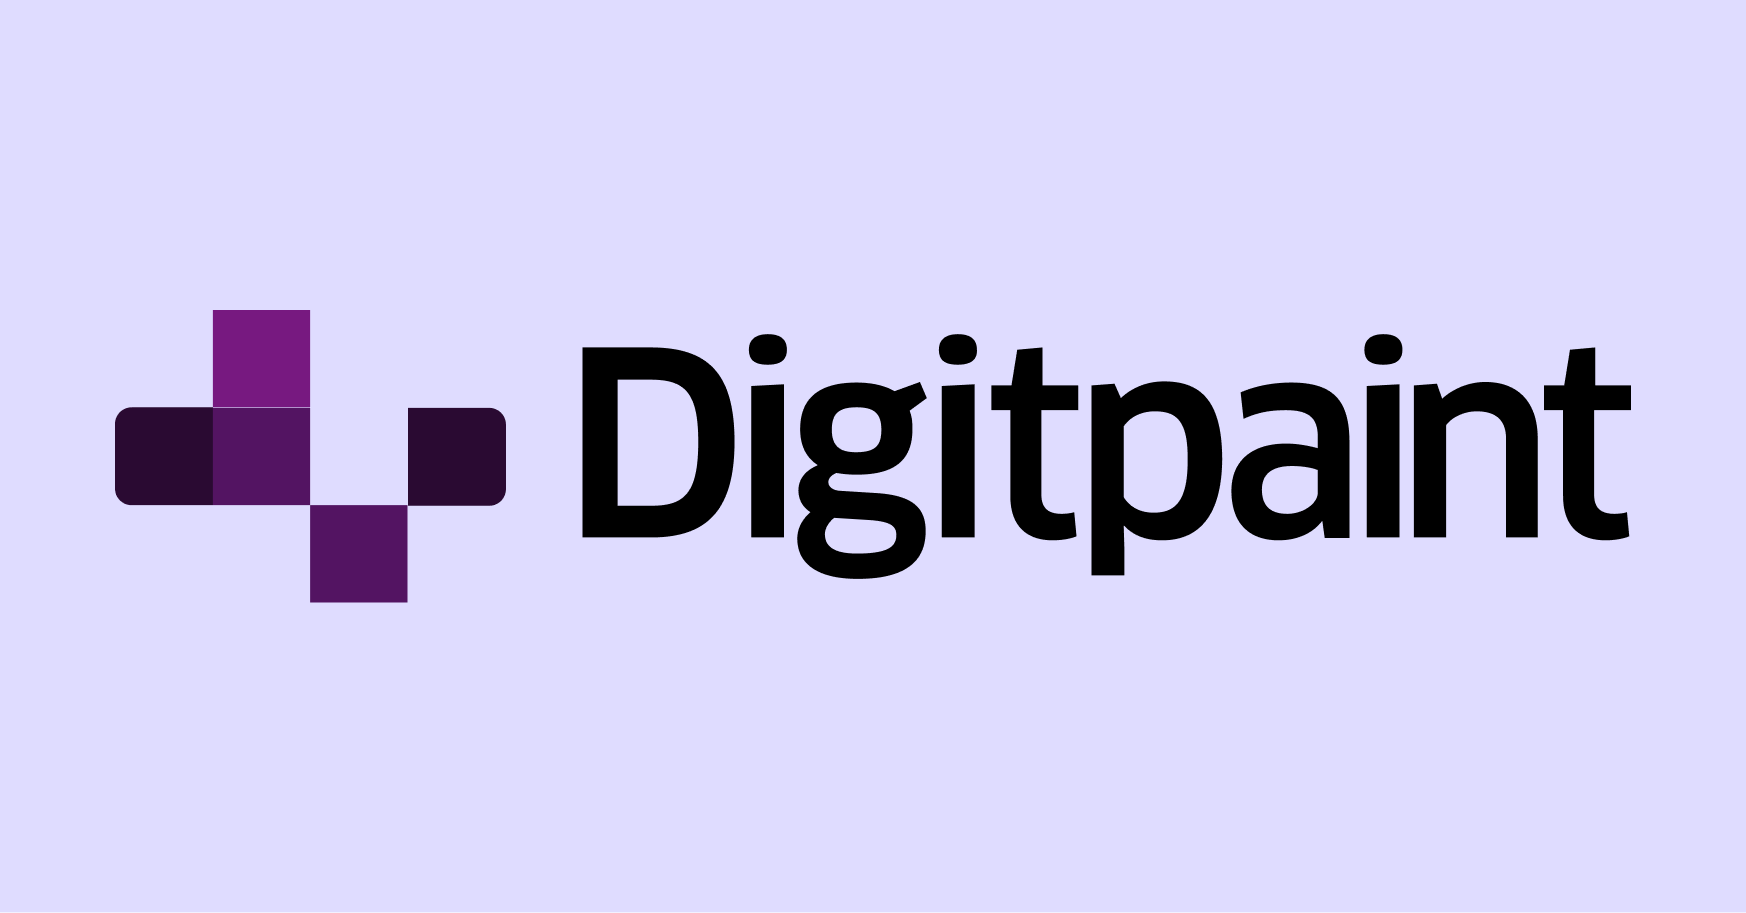 Agency Digitpaint logo with background